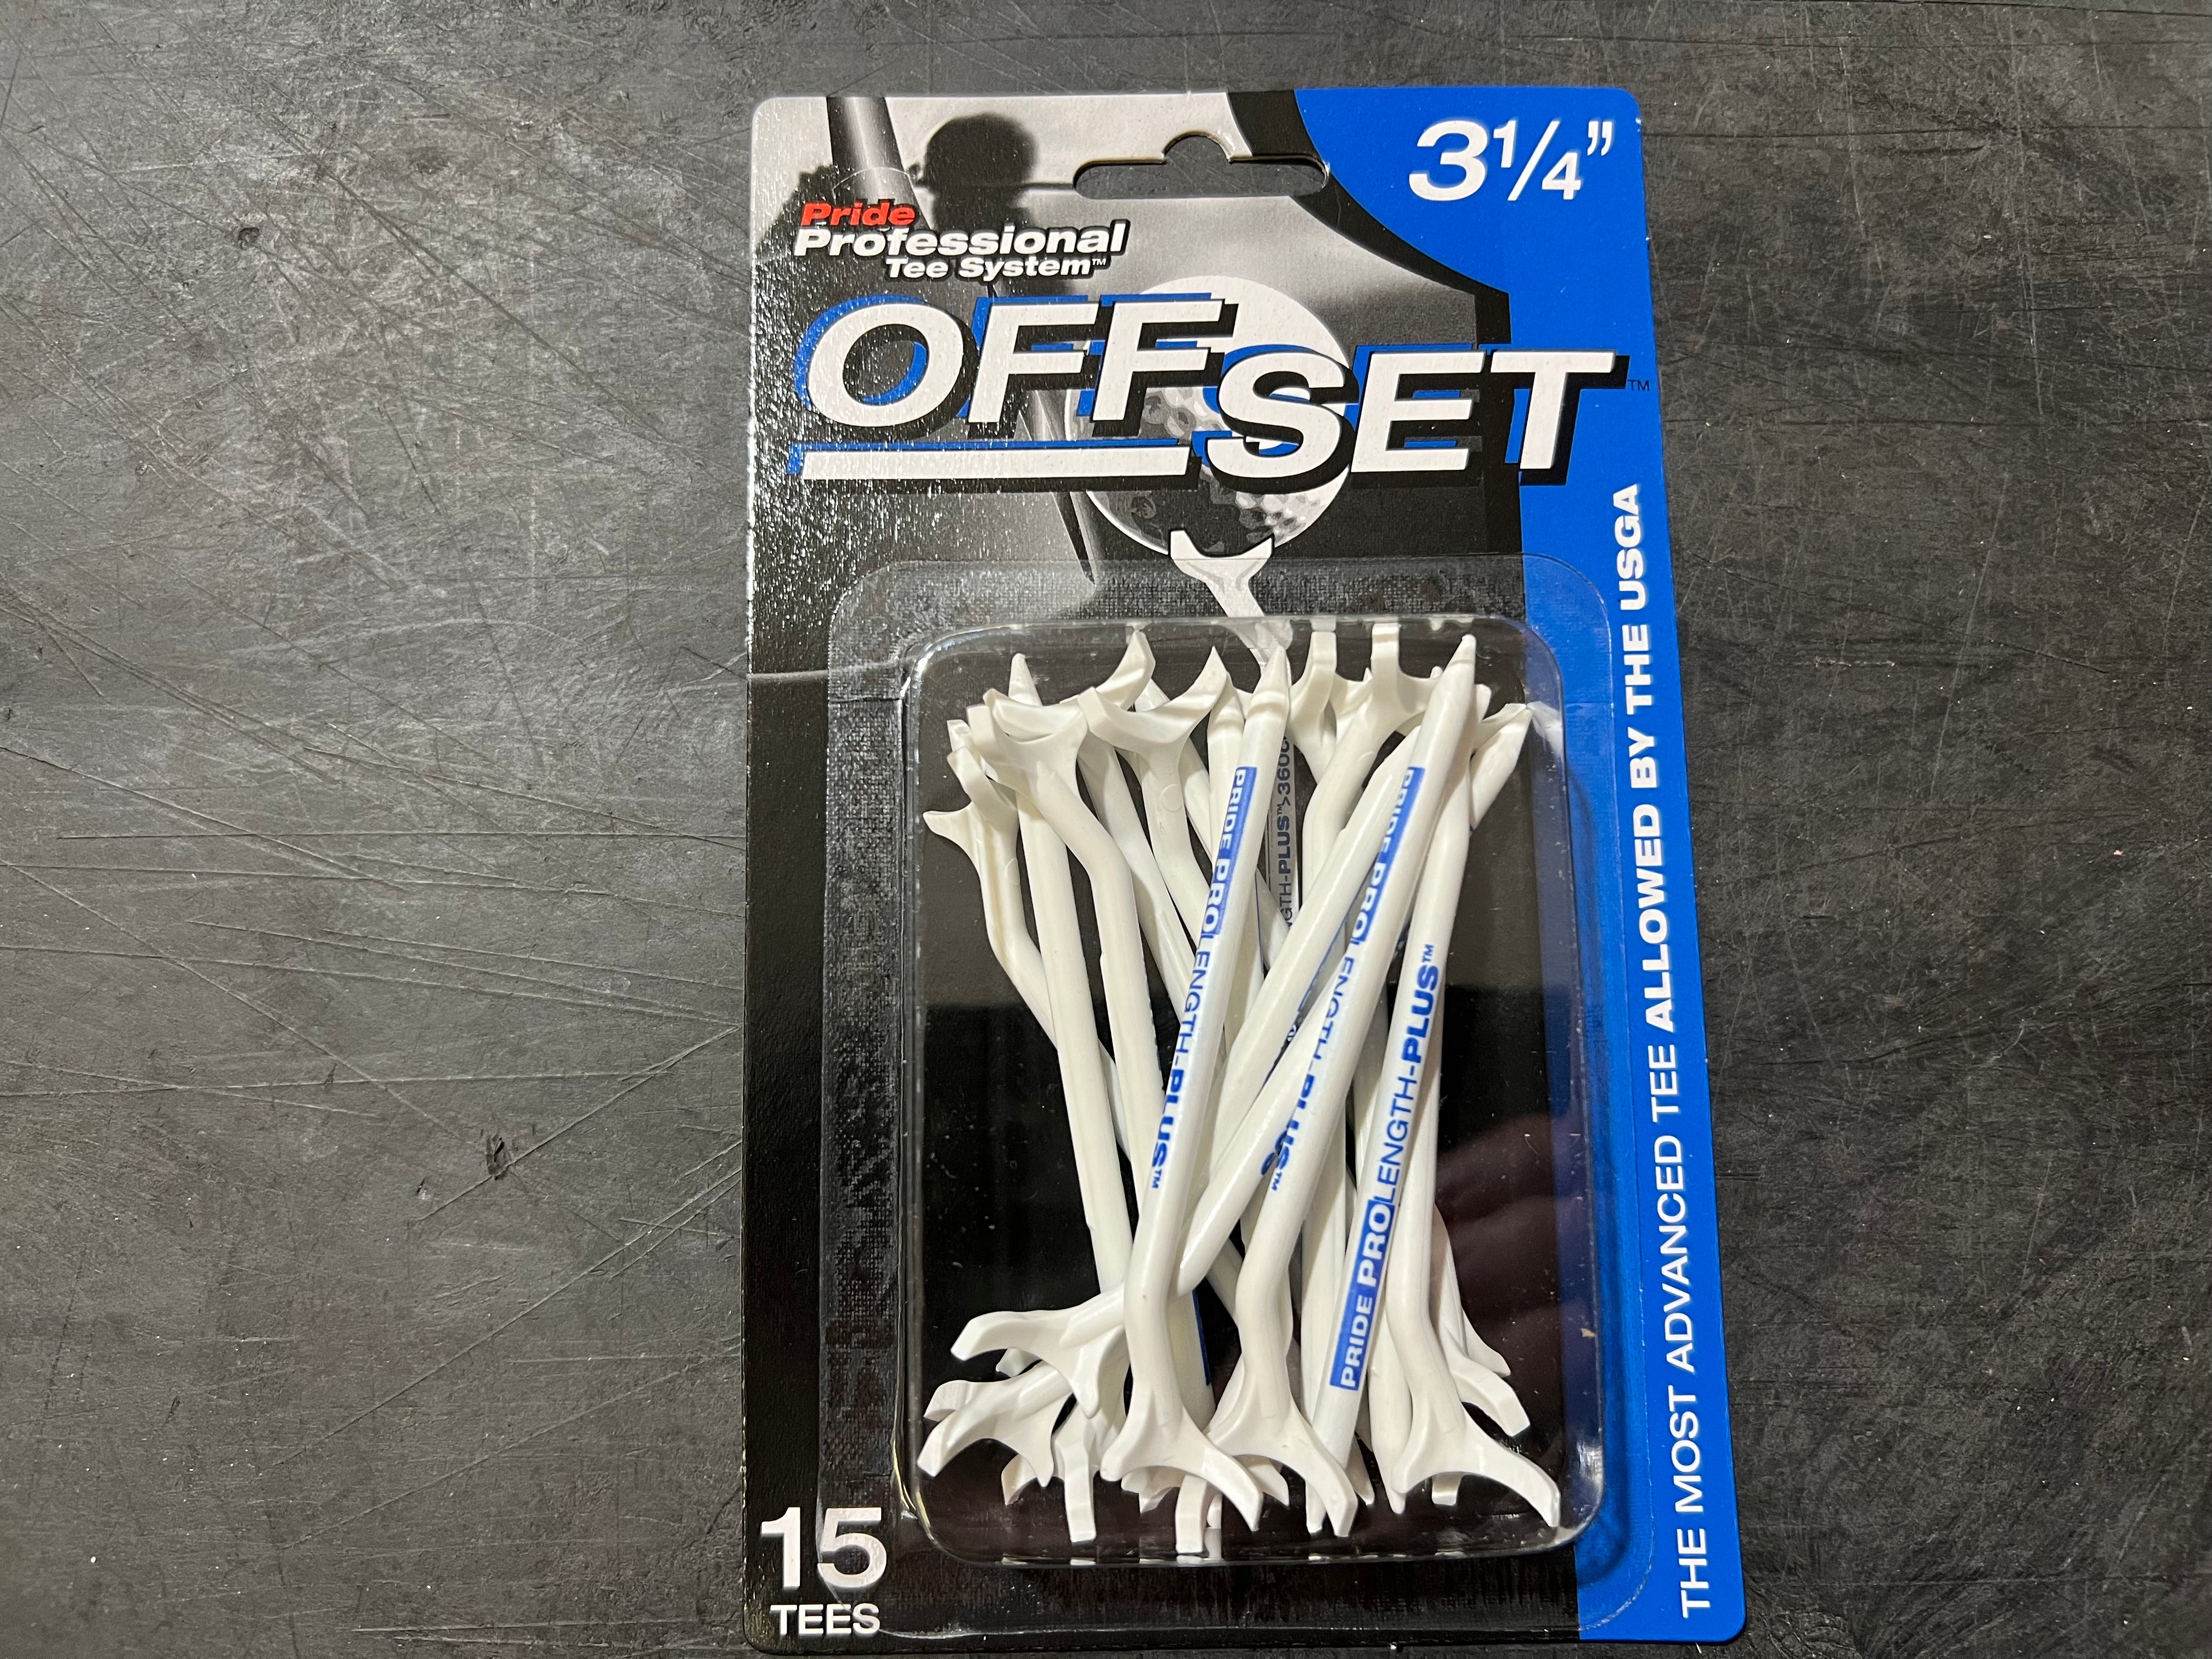 Pride Professional Tee System Offset Golf Tees